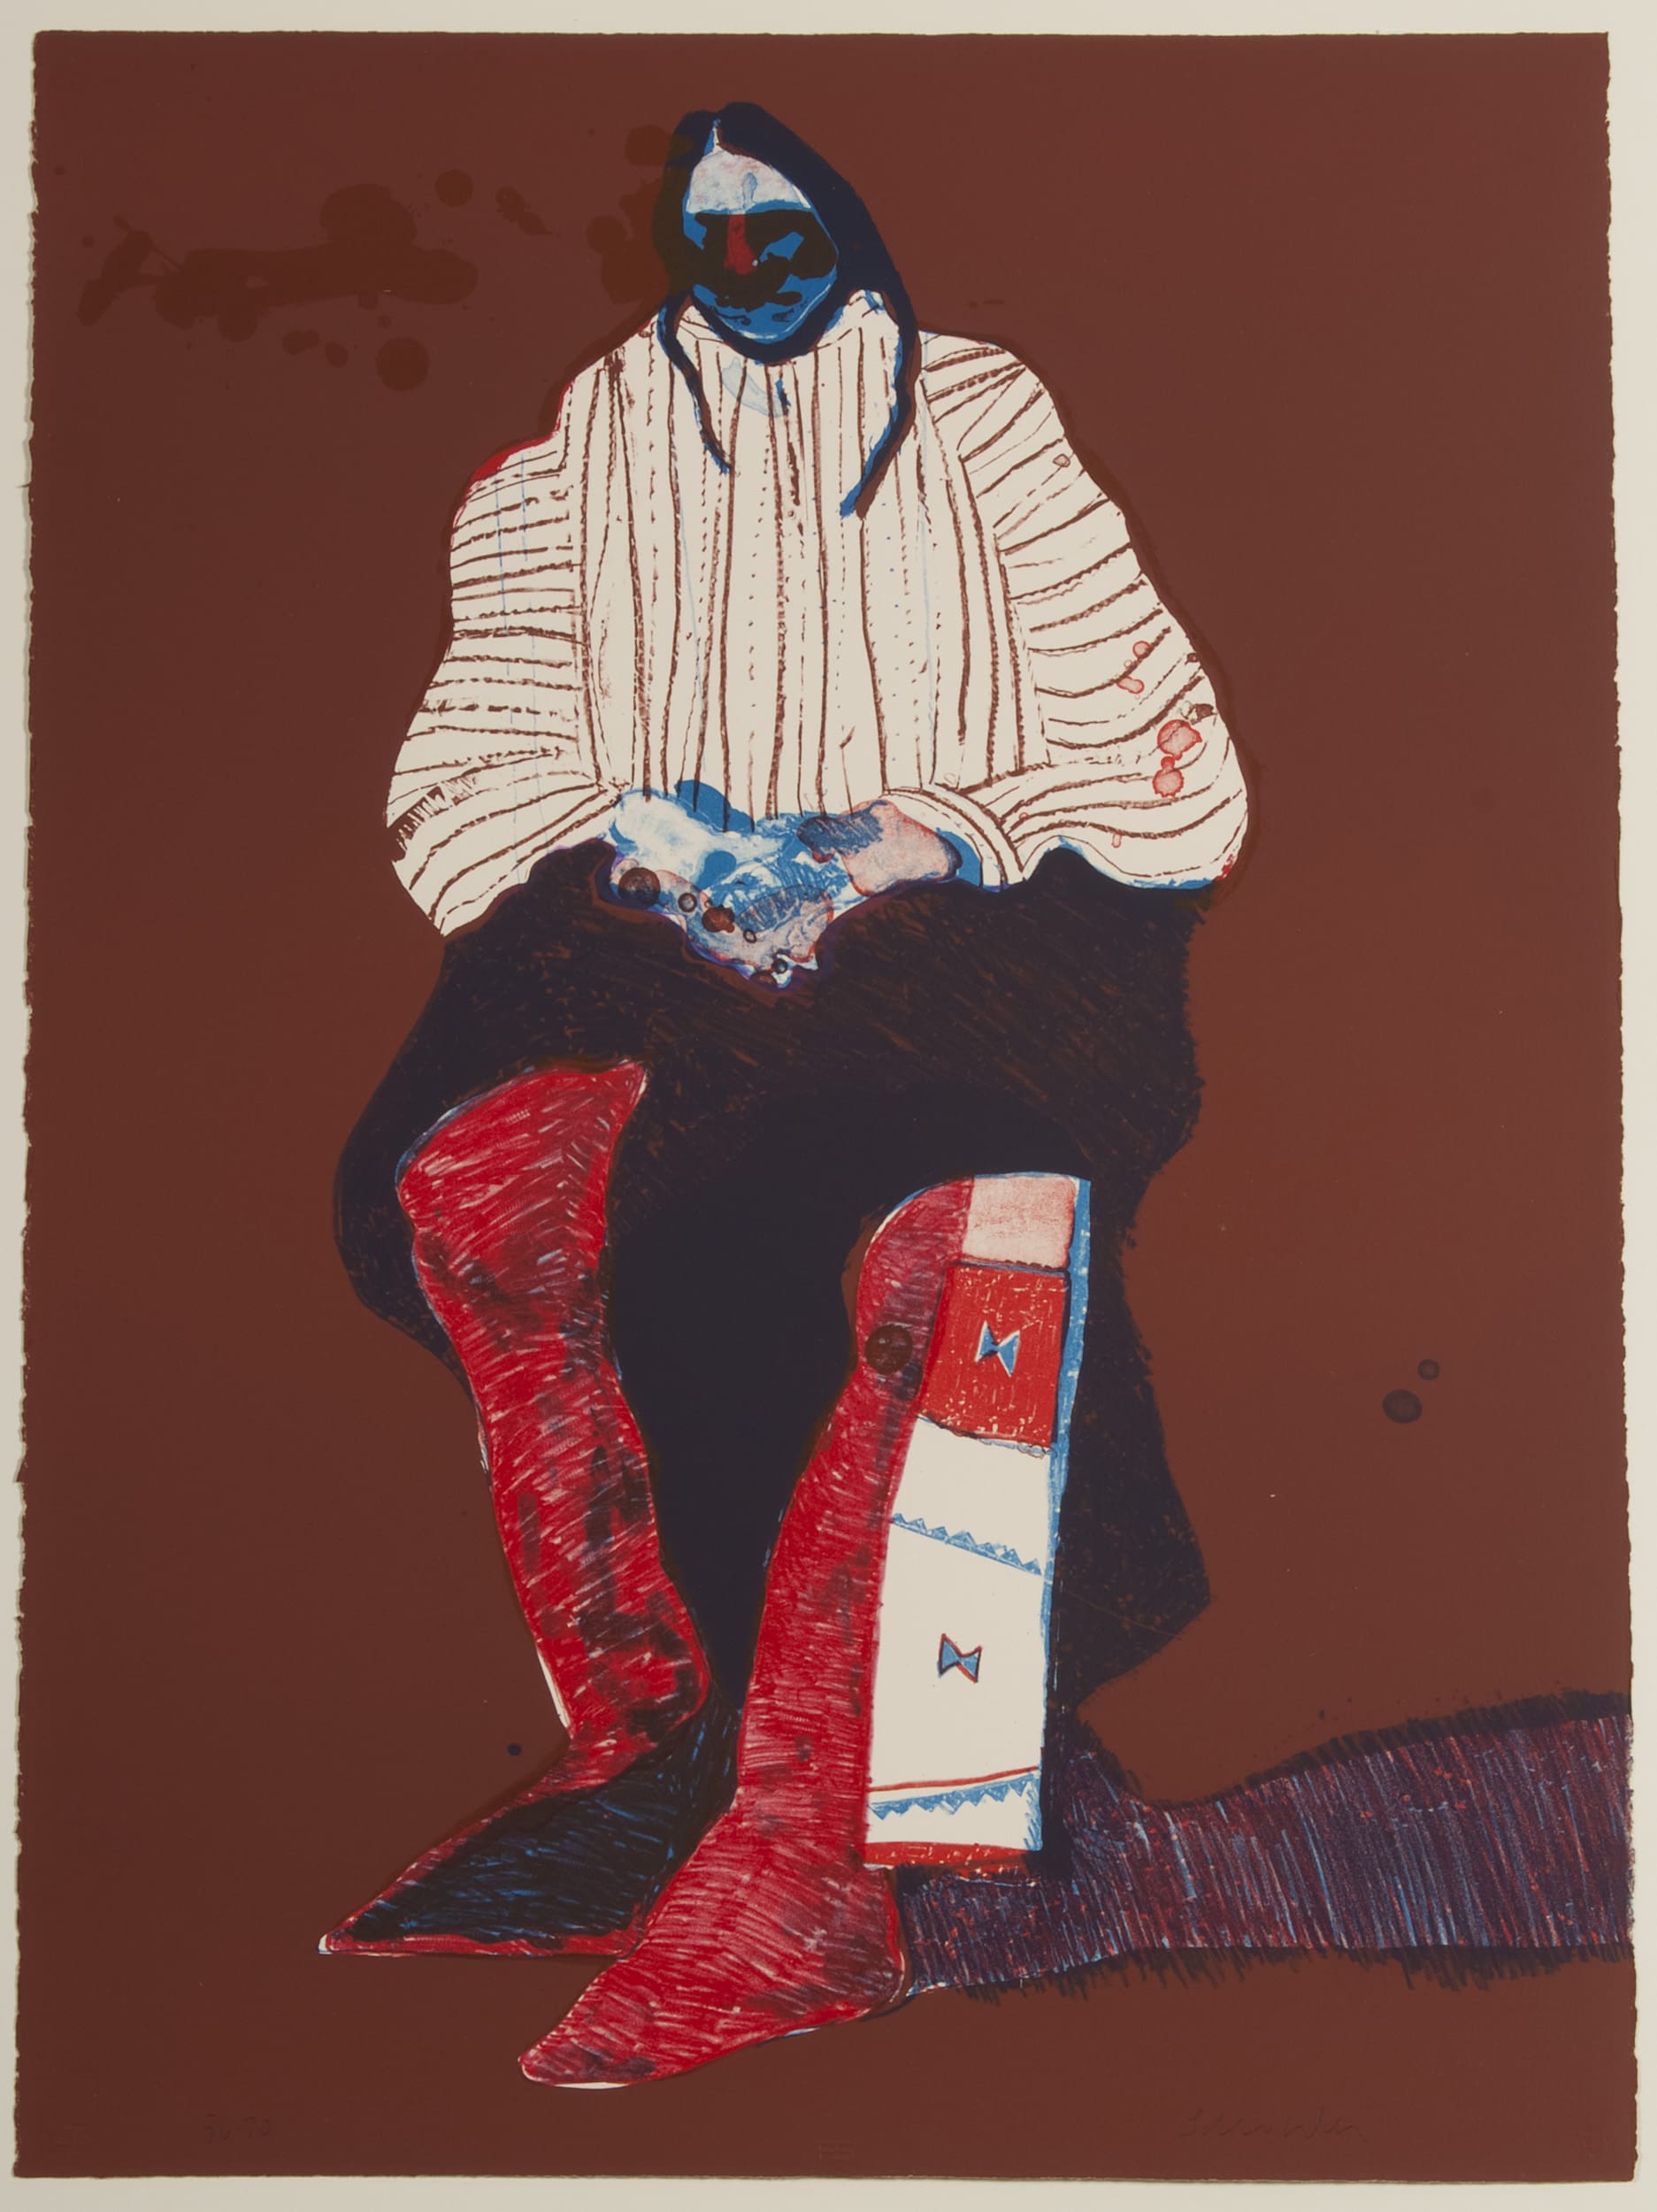 Fritz Scholder (Breckenridge, Minnesota, 1937 - 2005, Phoenix, Arizona) Indian with Beaded Sash 1976 Lithograph on paper 30 x 22 in. (76.2 x 55.9 cm) Collection of the Akron Art Museum Gift of Ray Graham III 1983.3 m